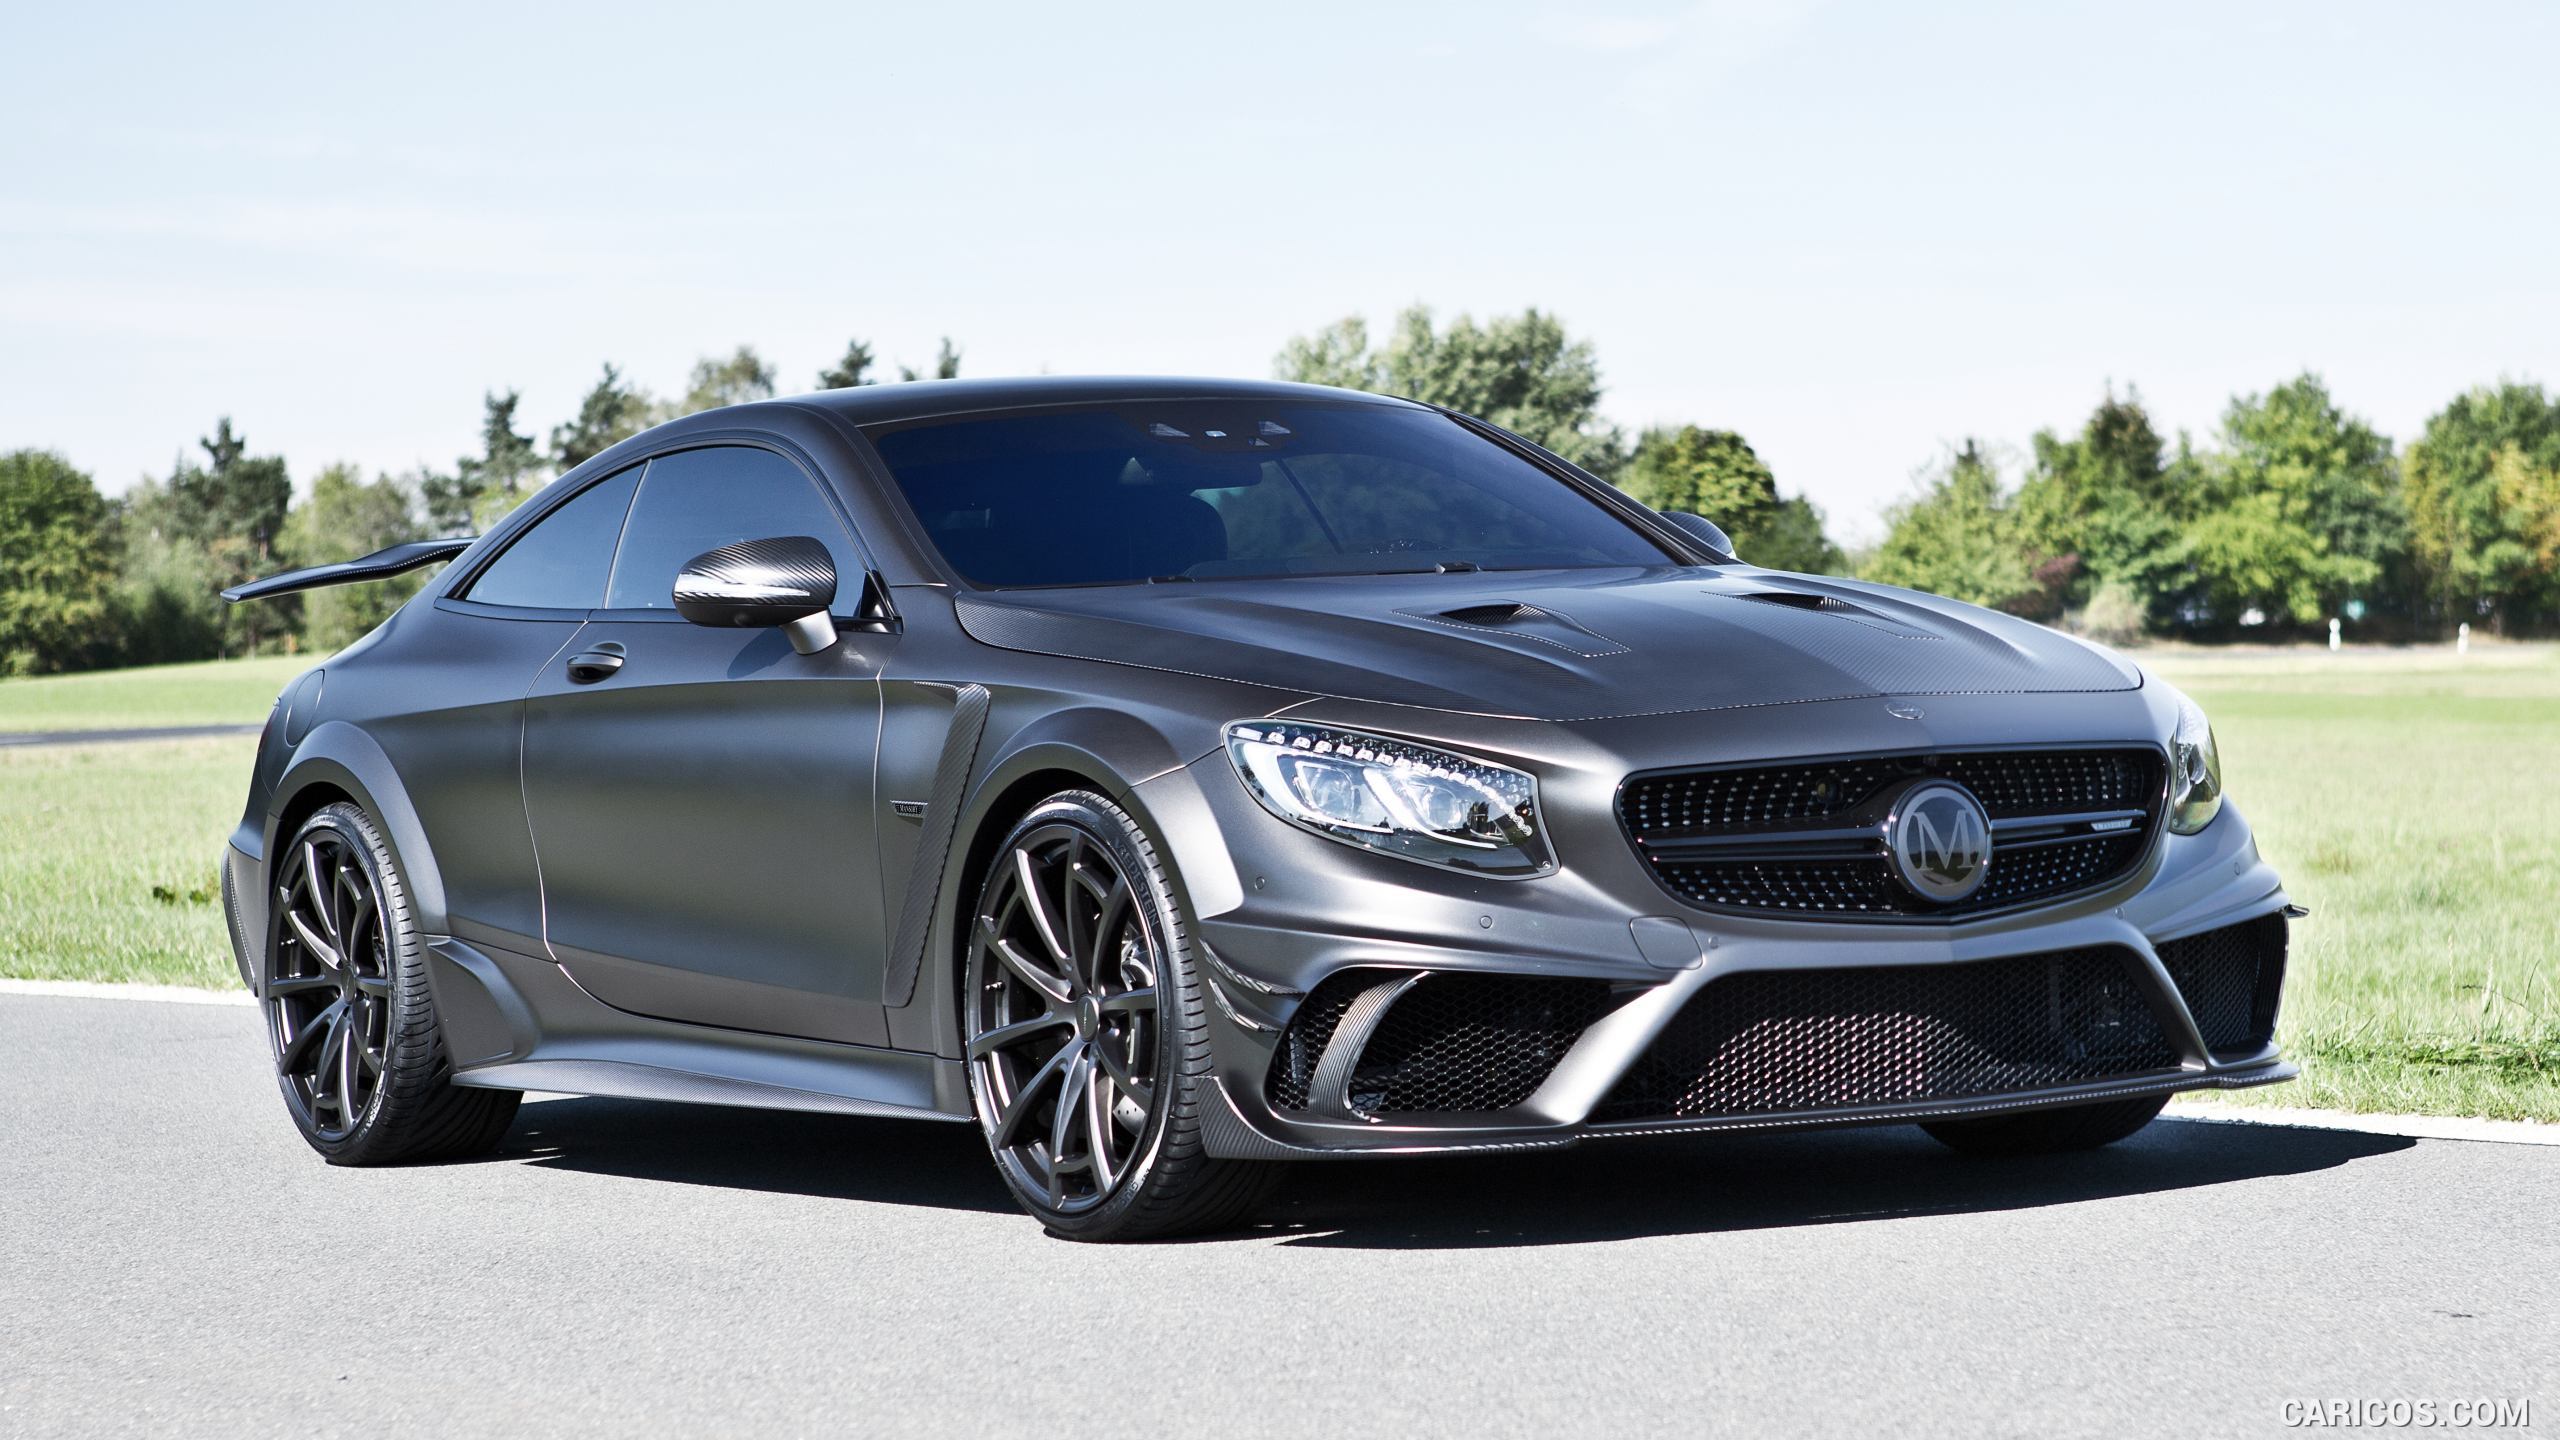 2015 MANSORY Mercedes S63 AMG Coupe Black Edition - Front, #1 of 12